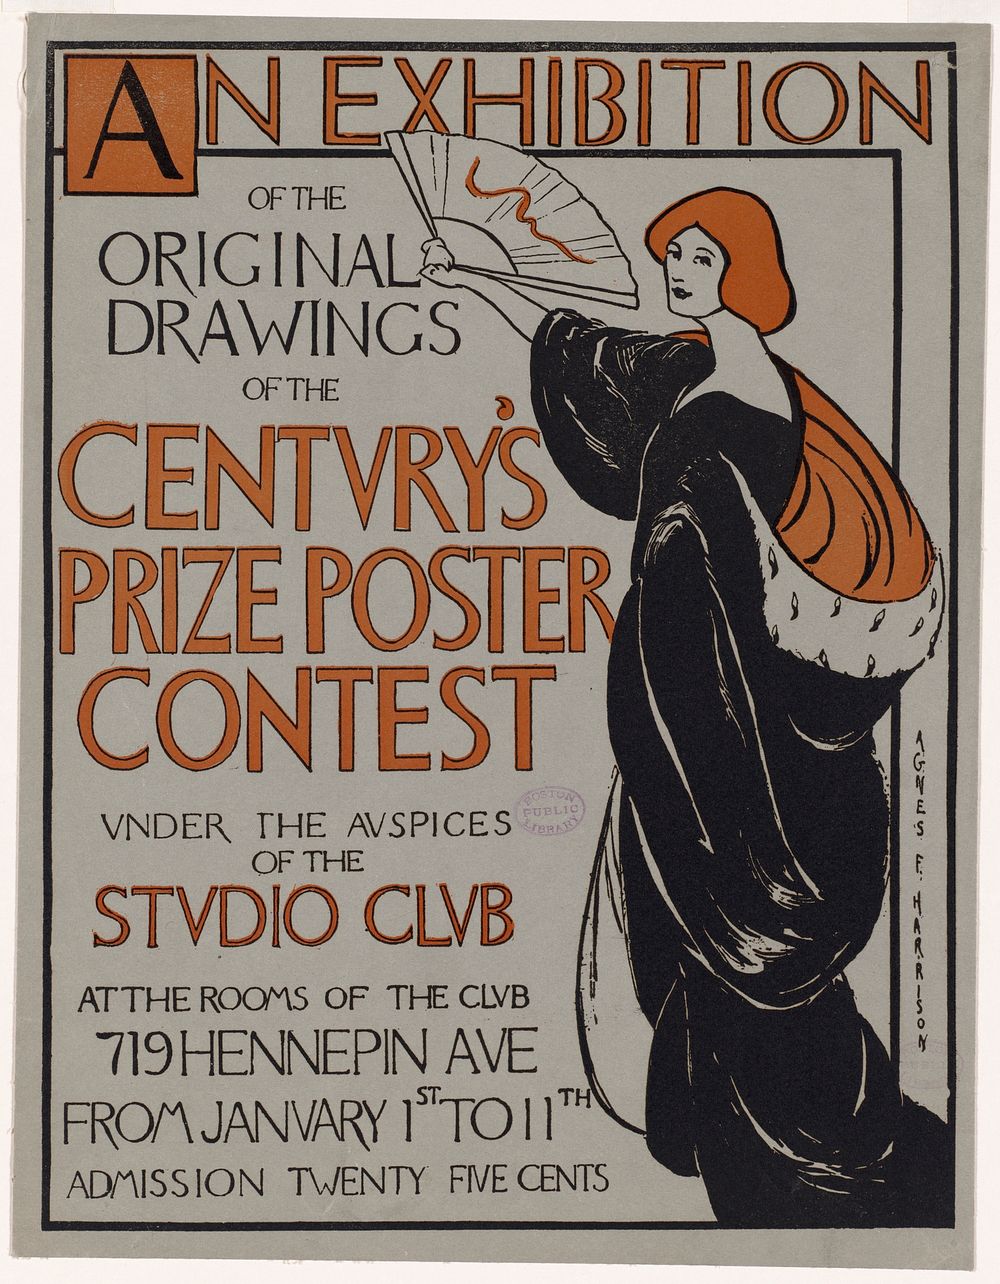             An exhibition of the original drawings of the Century's prize poster contest under the auspices of the Studio…